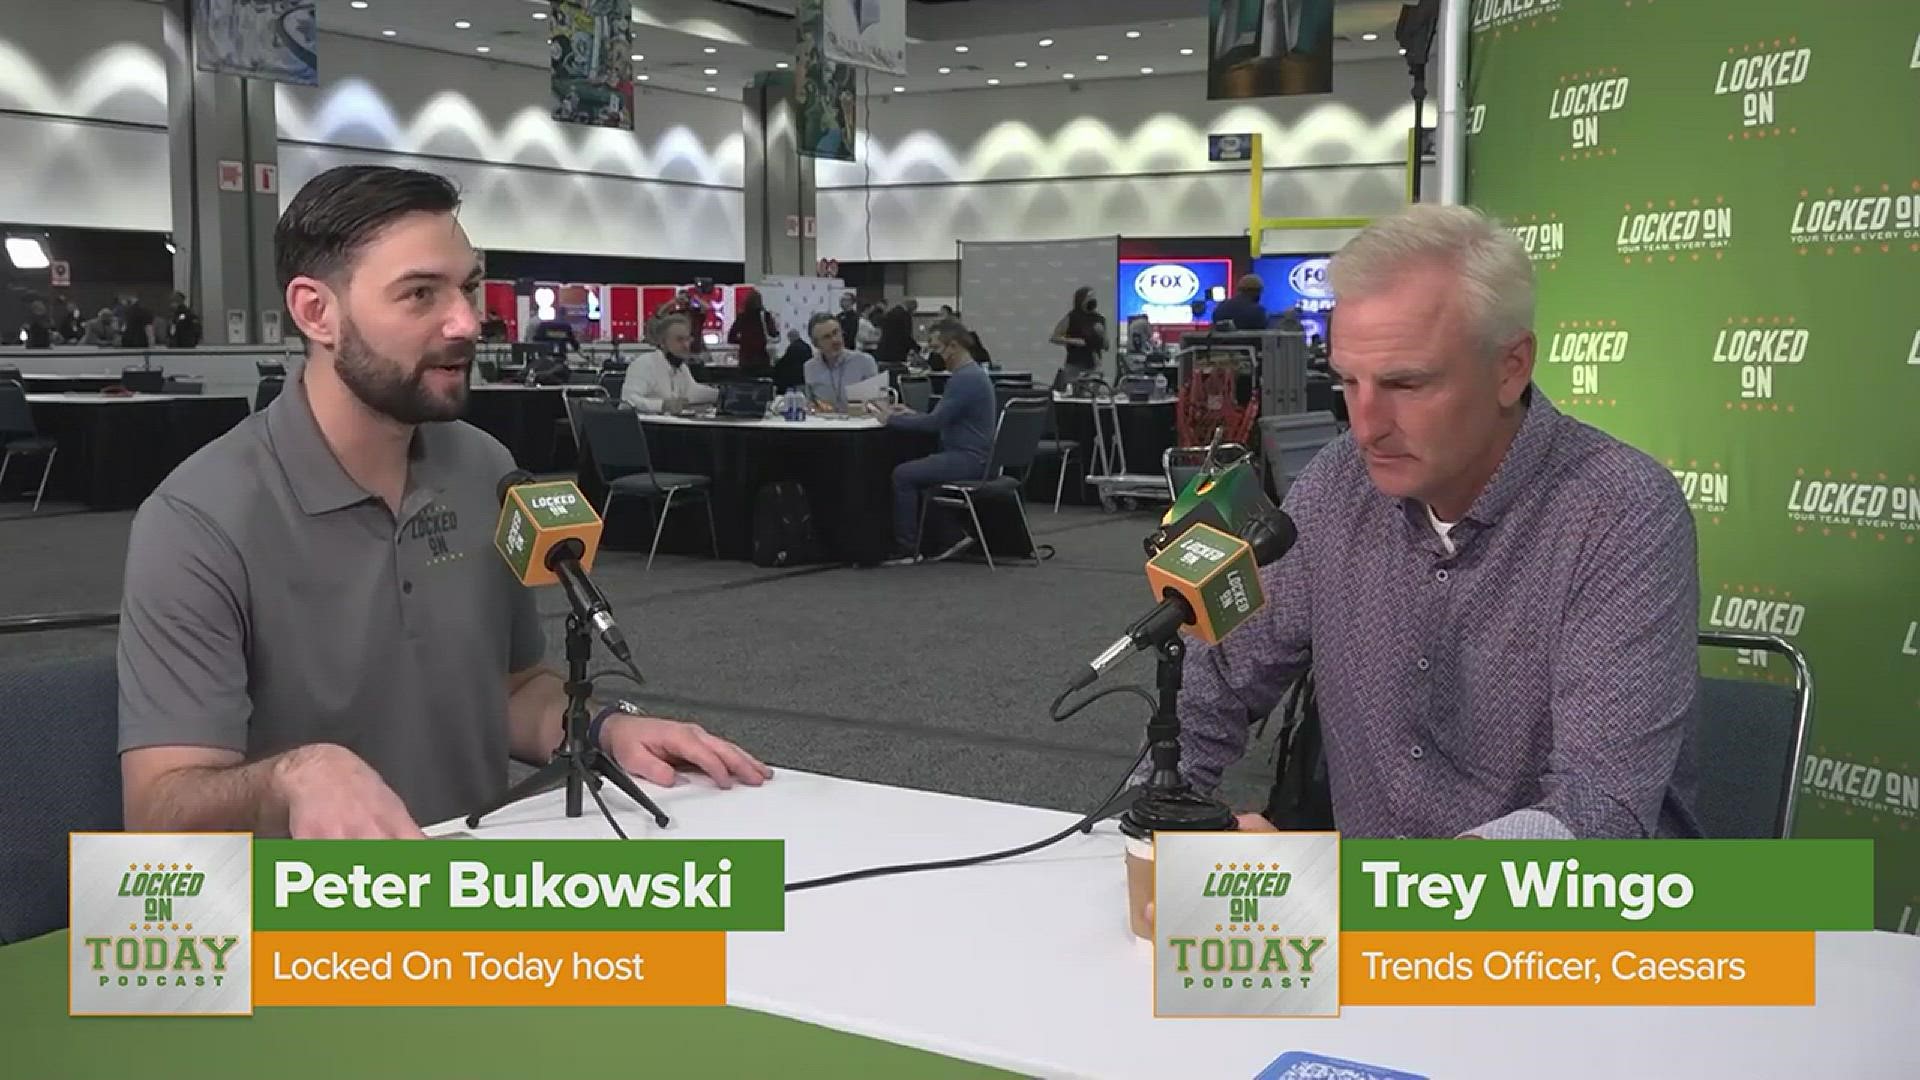 Former ESPN personality Trey Wingo joined Peter Bukowski of the Locked On Today podcast on Radio Row to dish his thoughts on Aaron Rodgers' future.